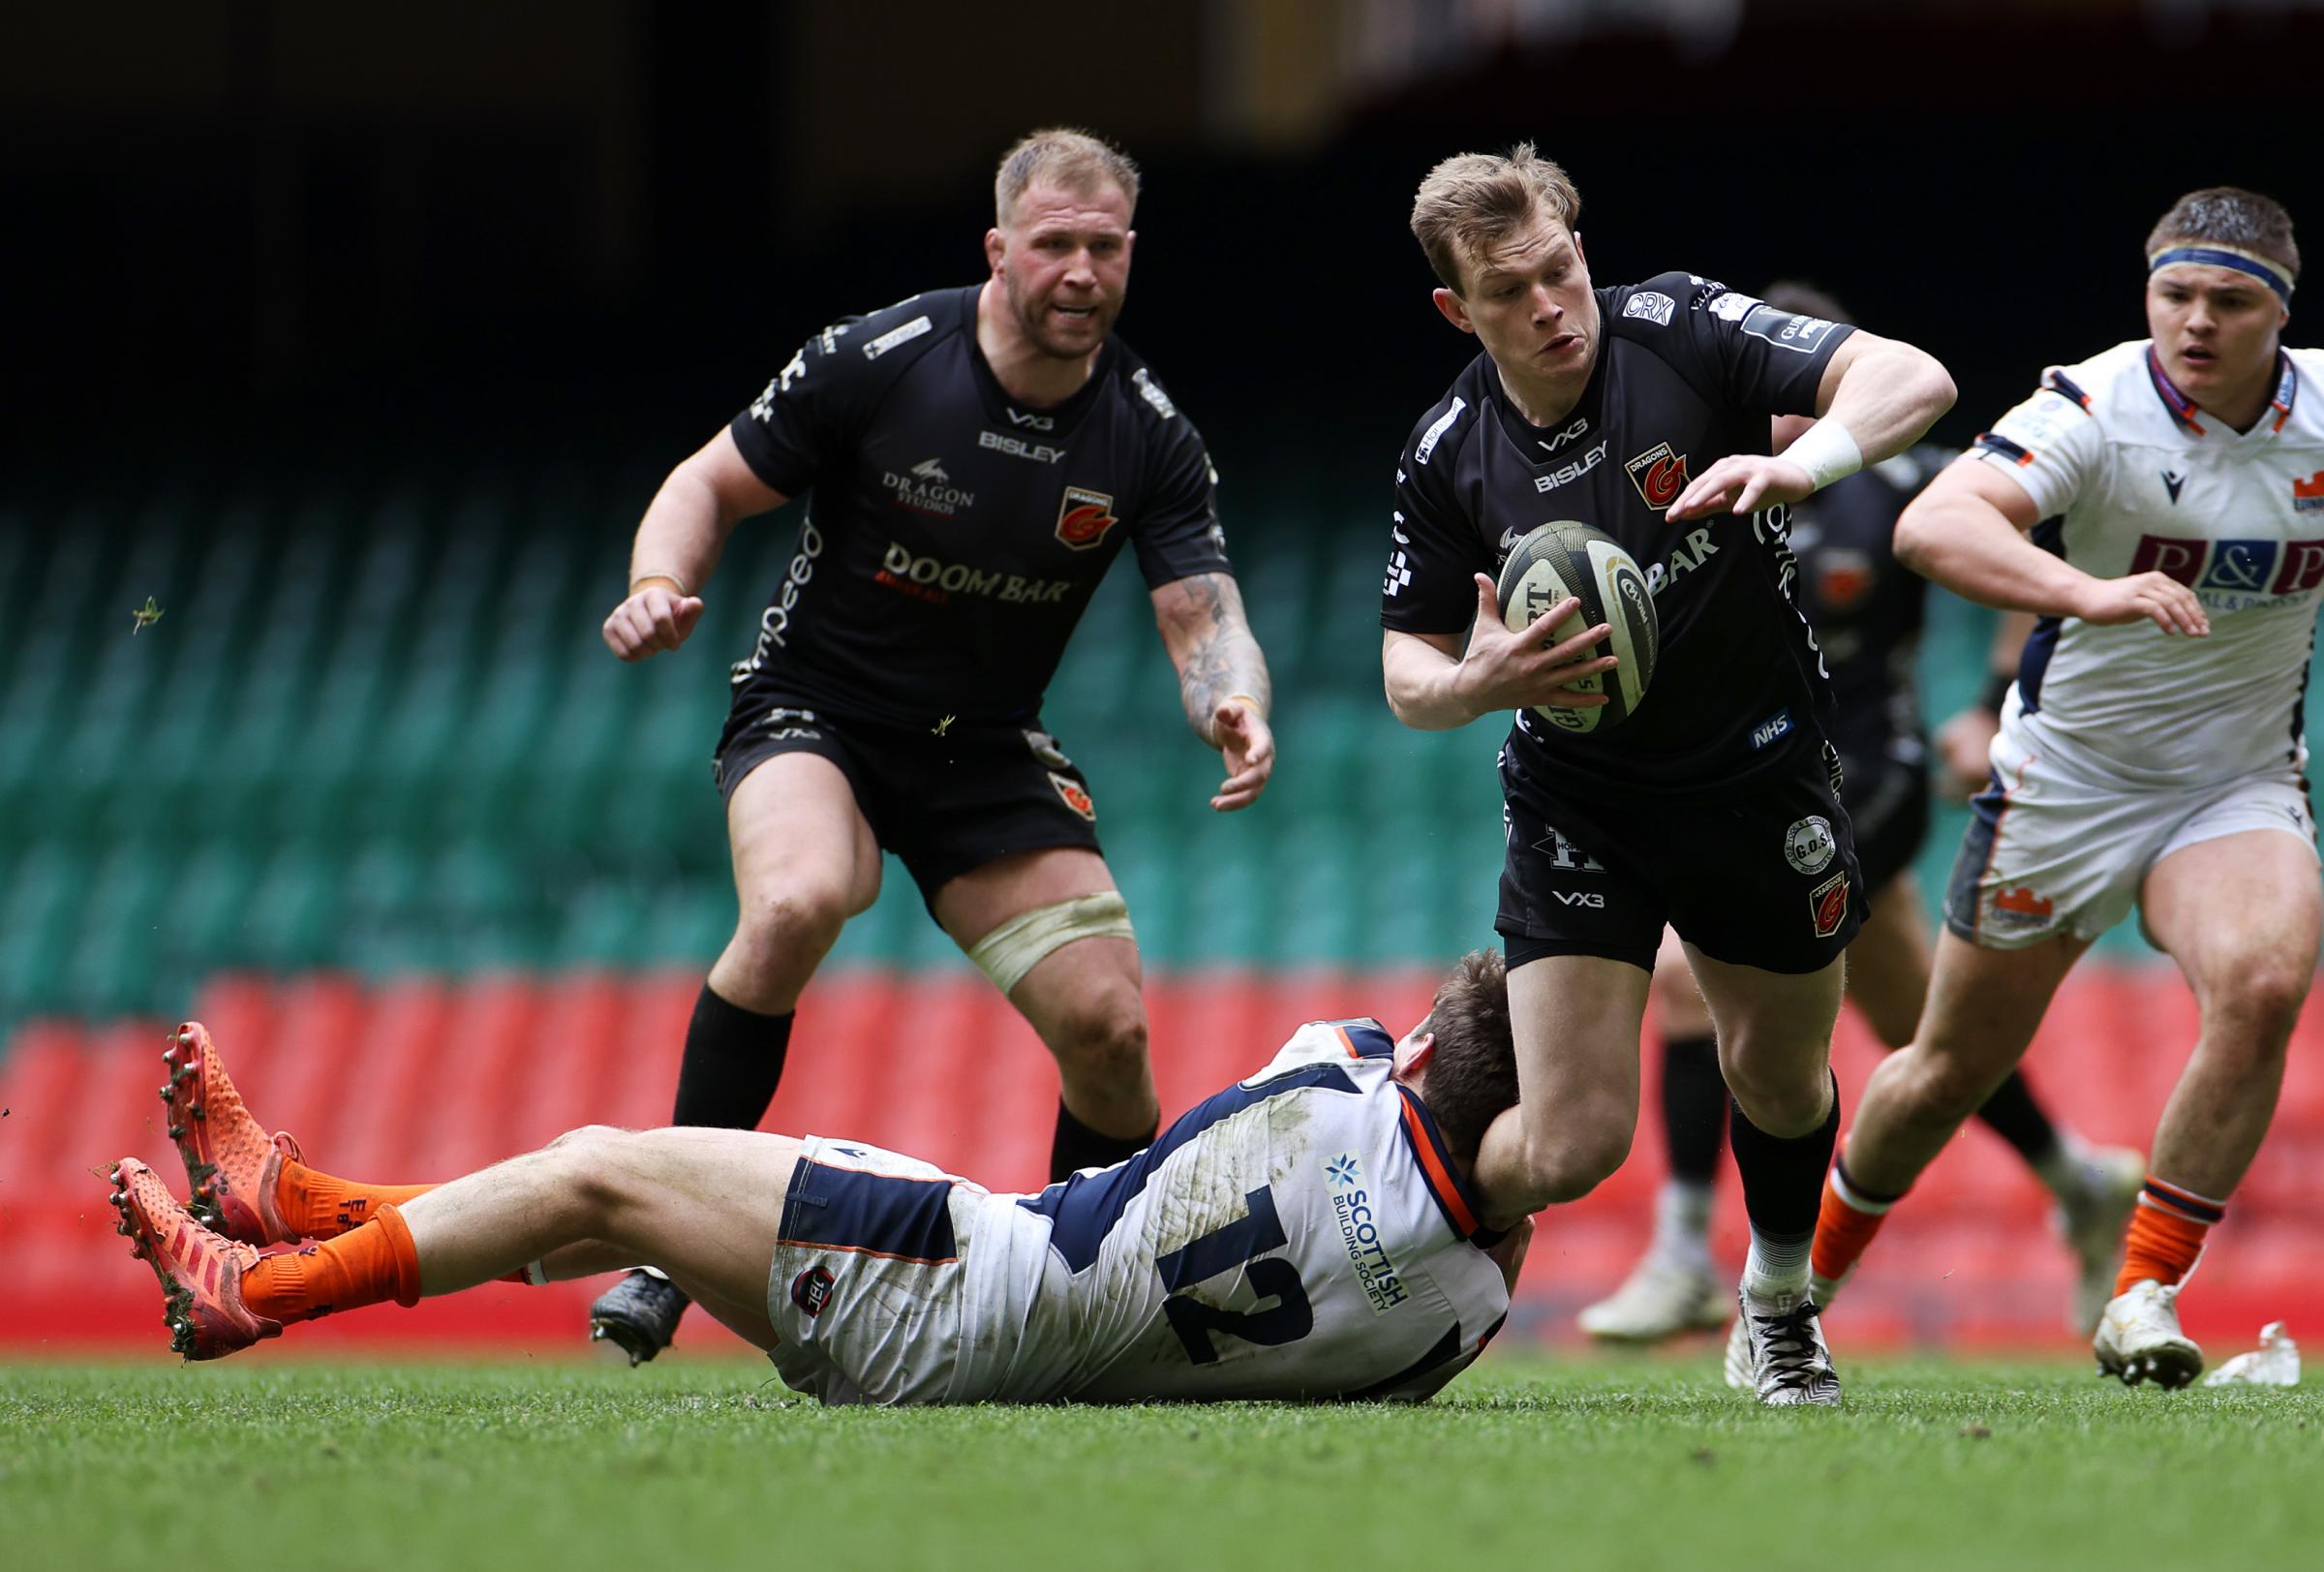 Nick Tompkins is tackled on the attack for the Dragons against Edinburgh